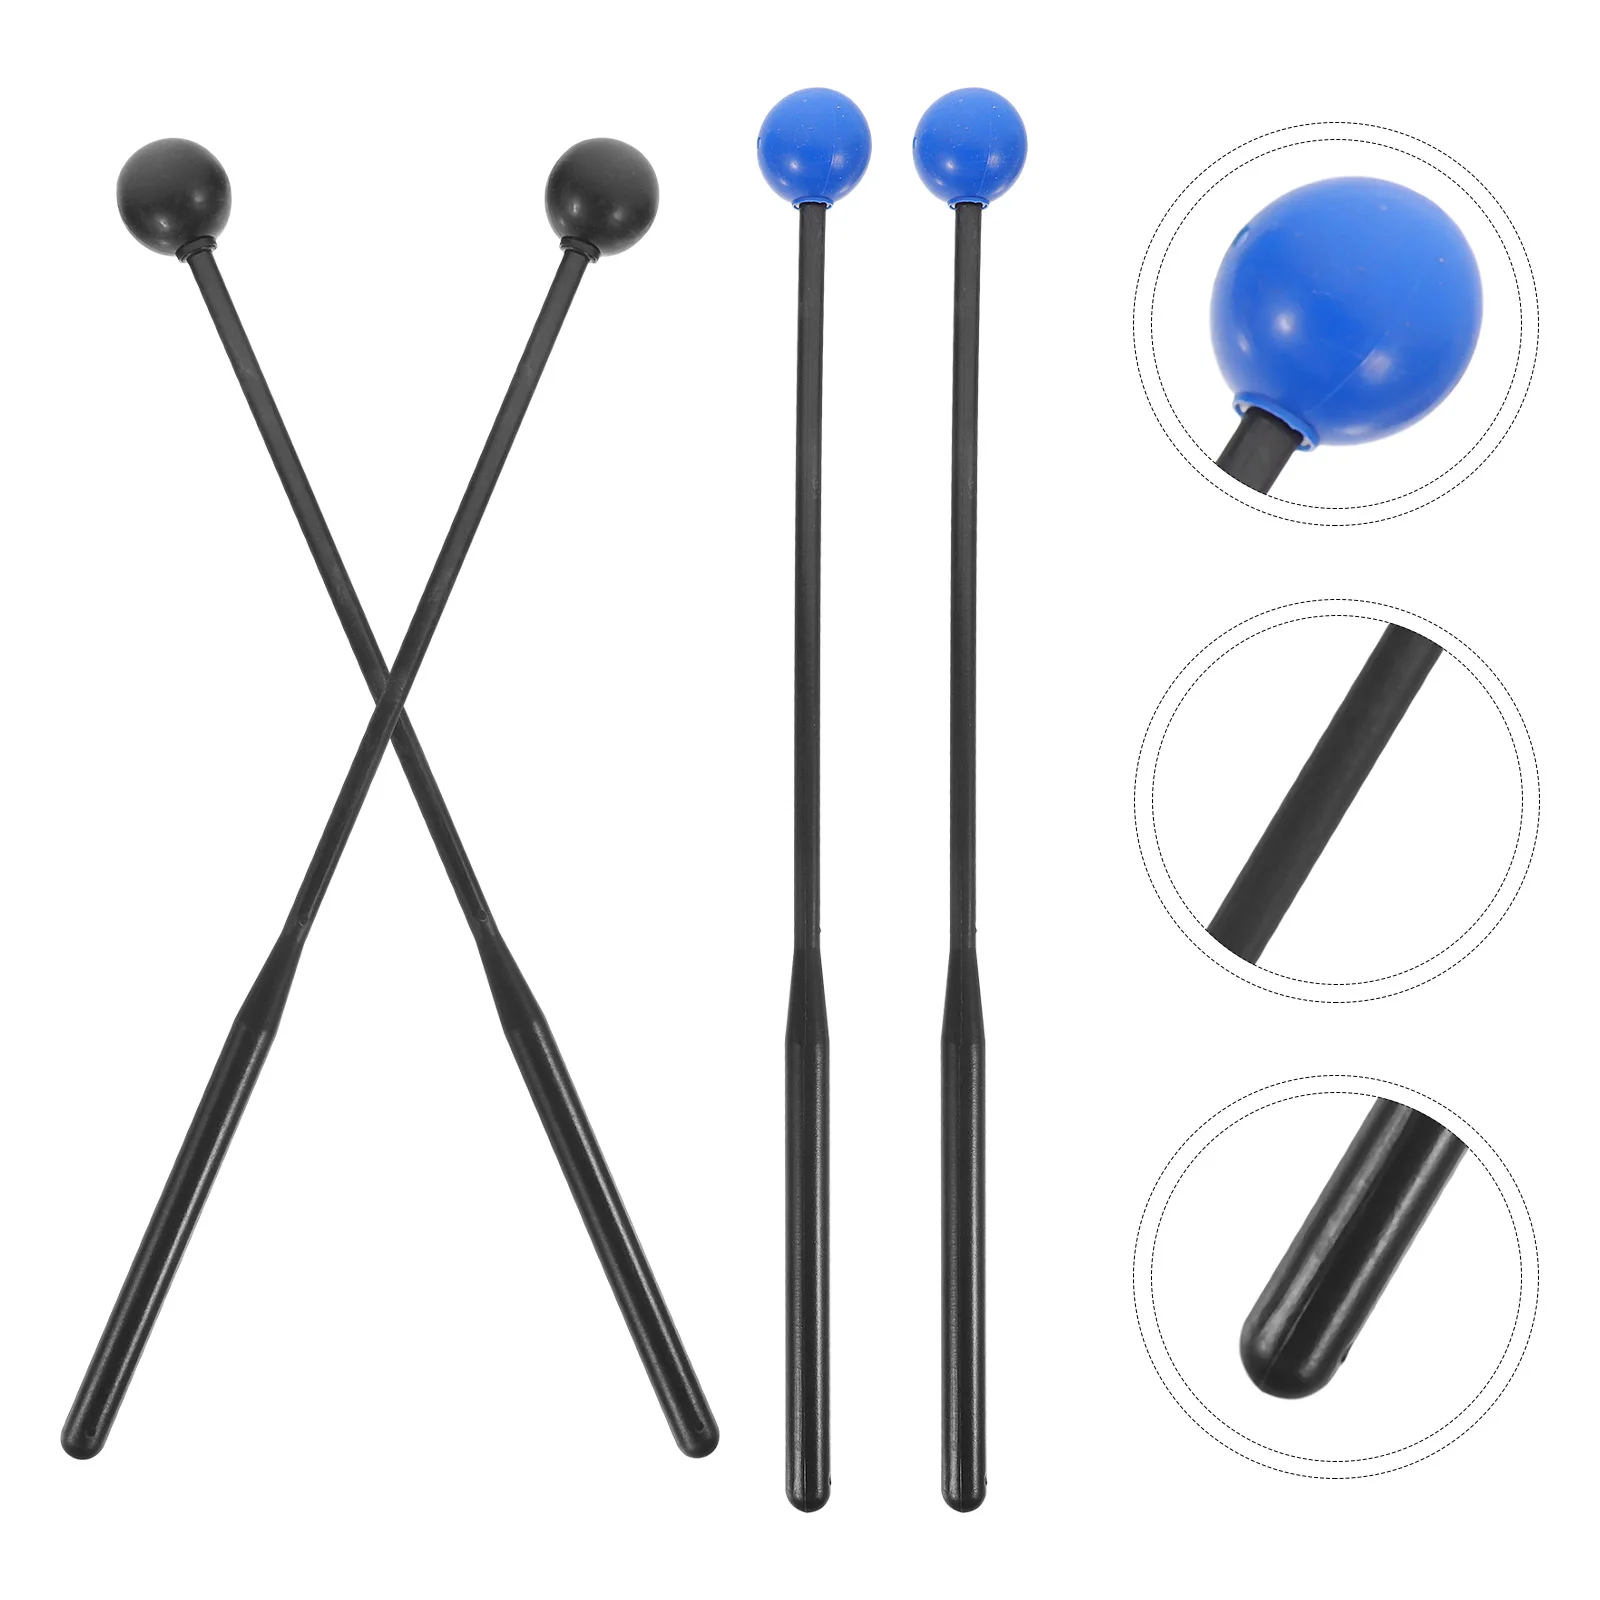 Tongue Drum Drumstick Percussion Instrument Mallets Marimba Drumsticks Practice Mallets for Beginners drumstick support for mic stand drumstick holder for drum kits mallet gifts